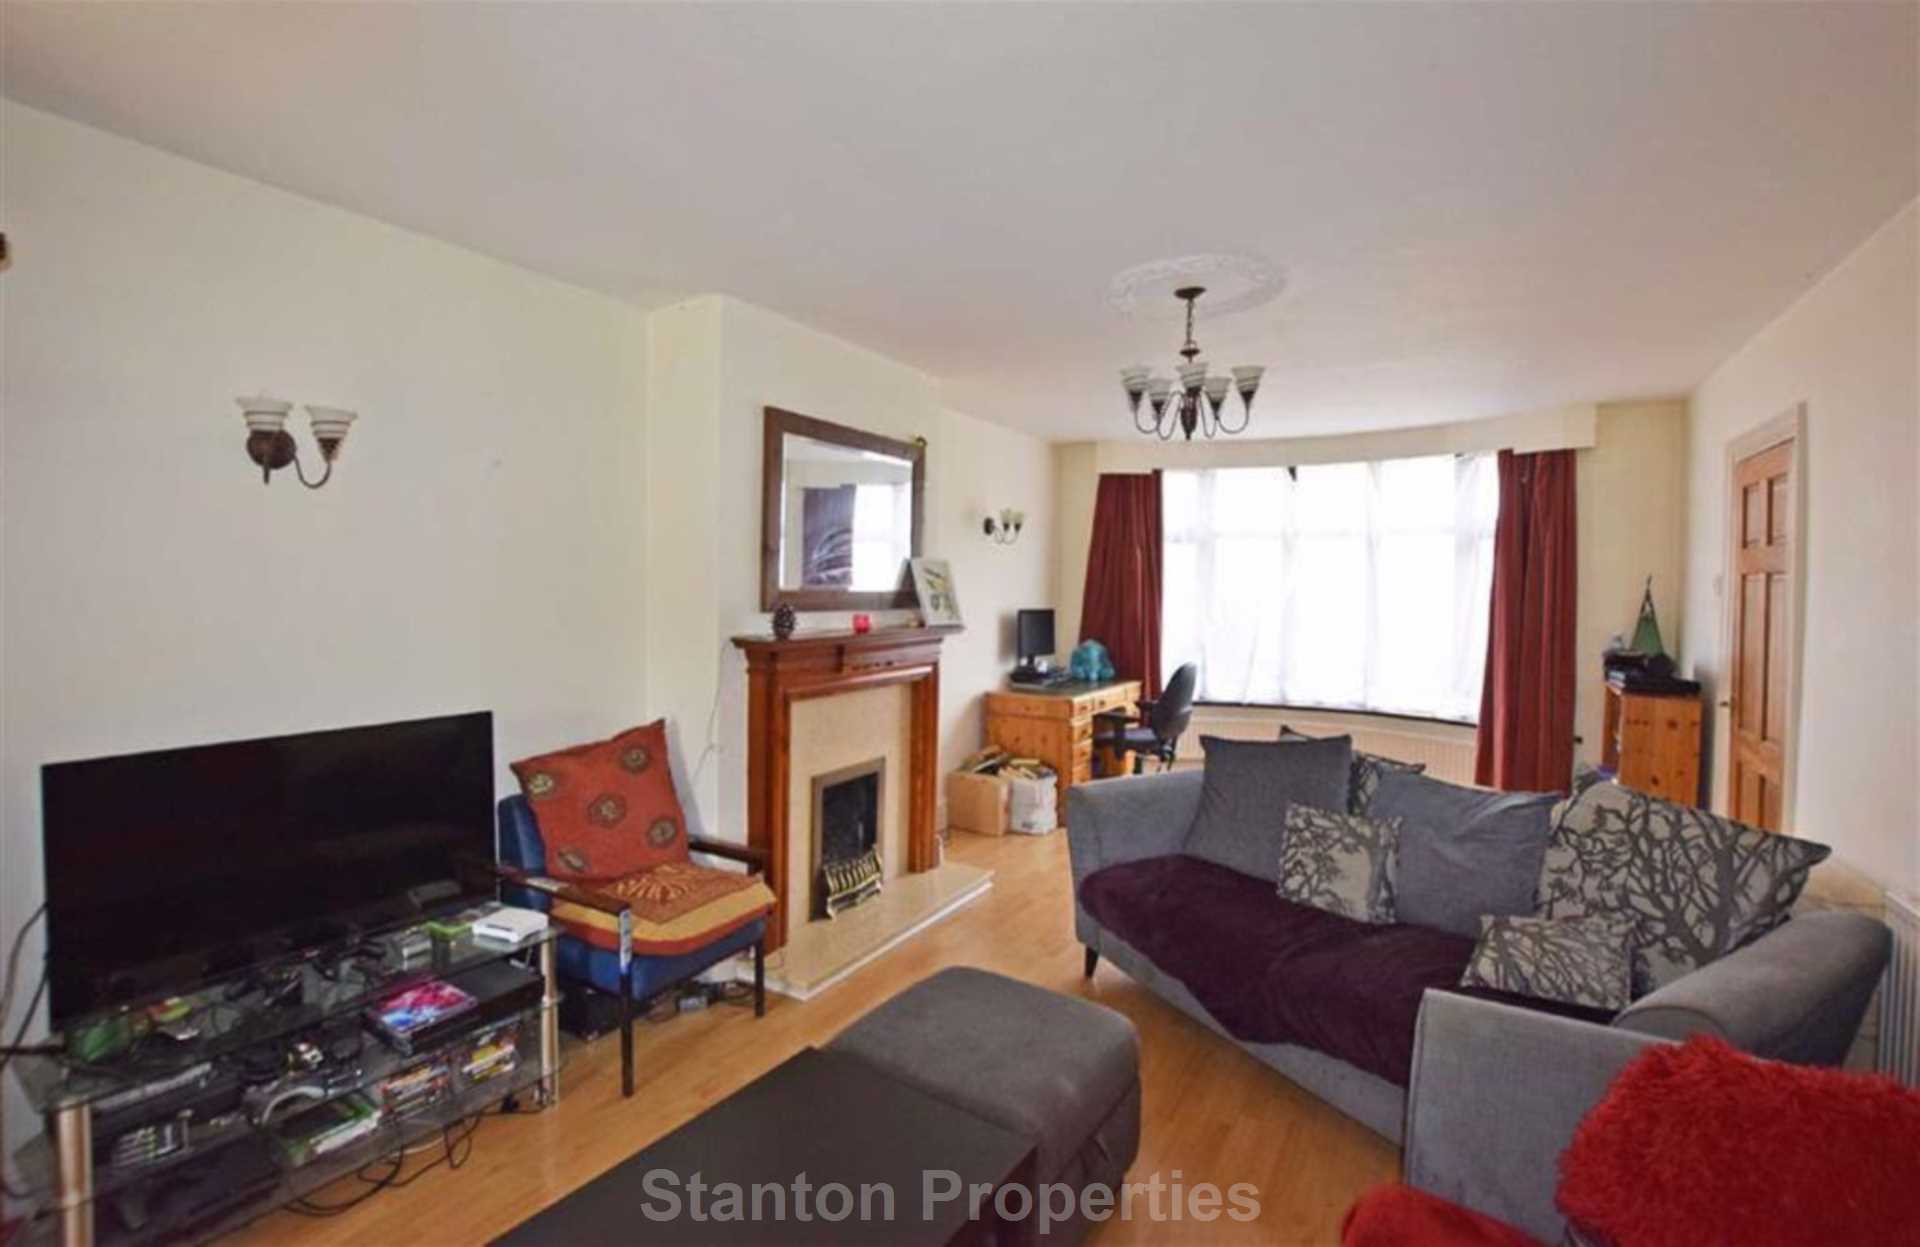 £110 pppw, Arnfield Road, Withington, Image 1